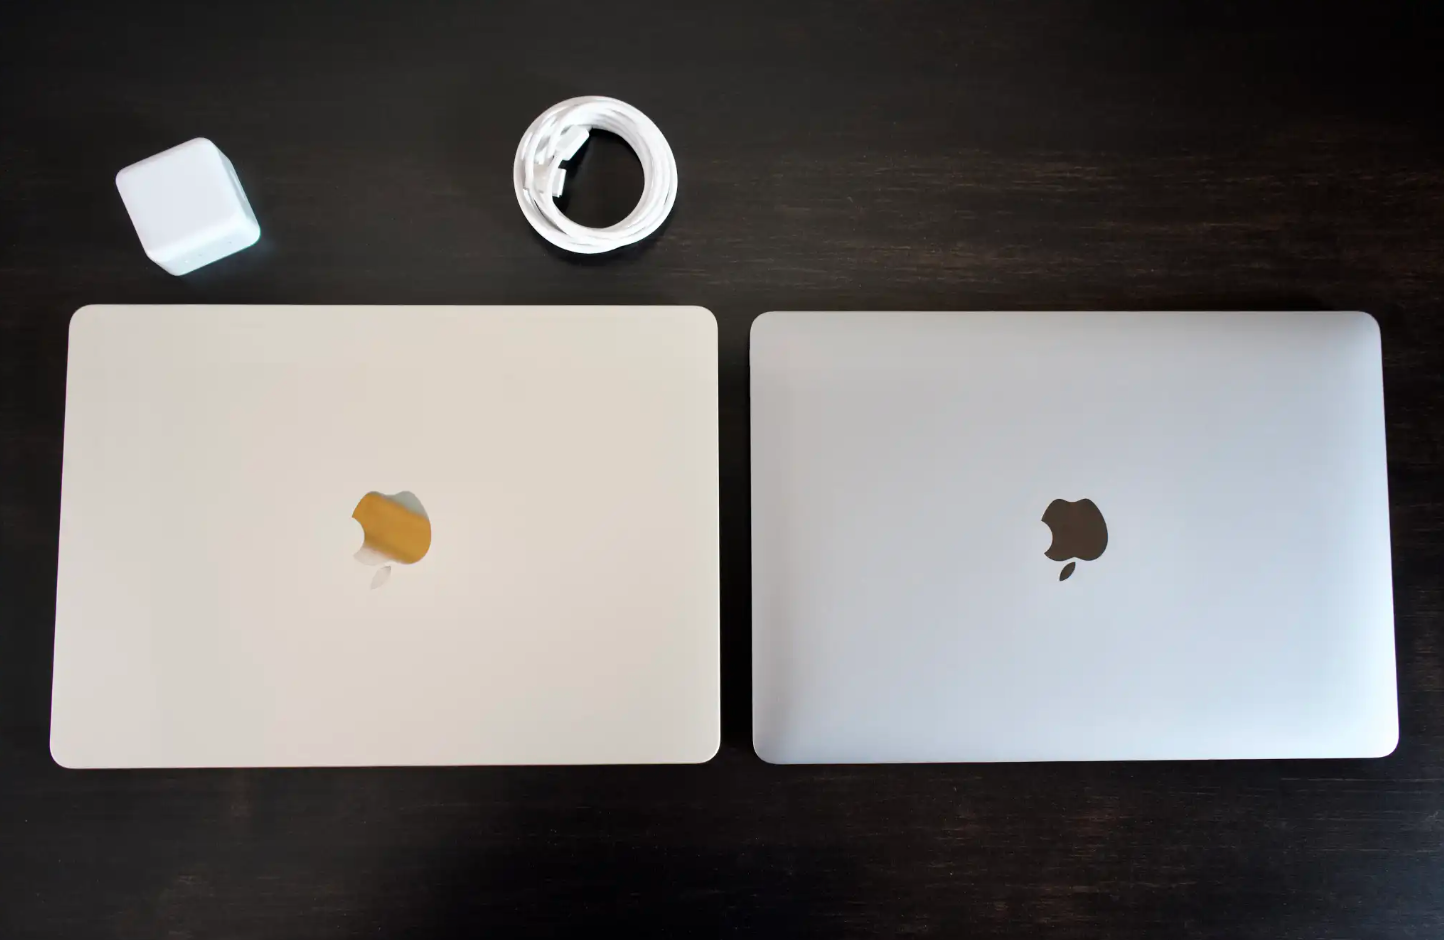 M2 MacBook Air on the left and M1 MacBook Air on the right